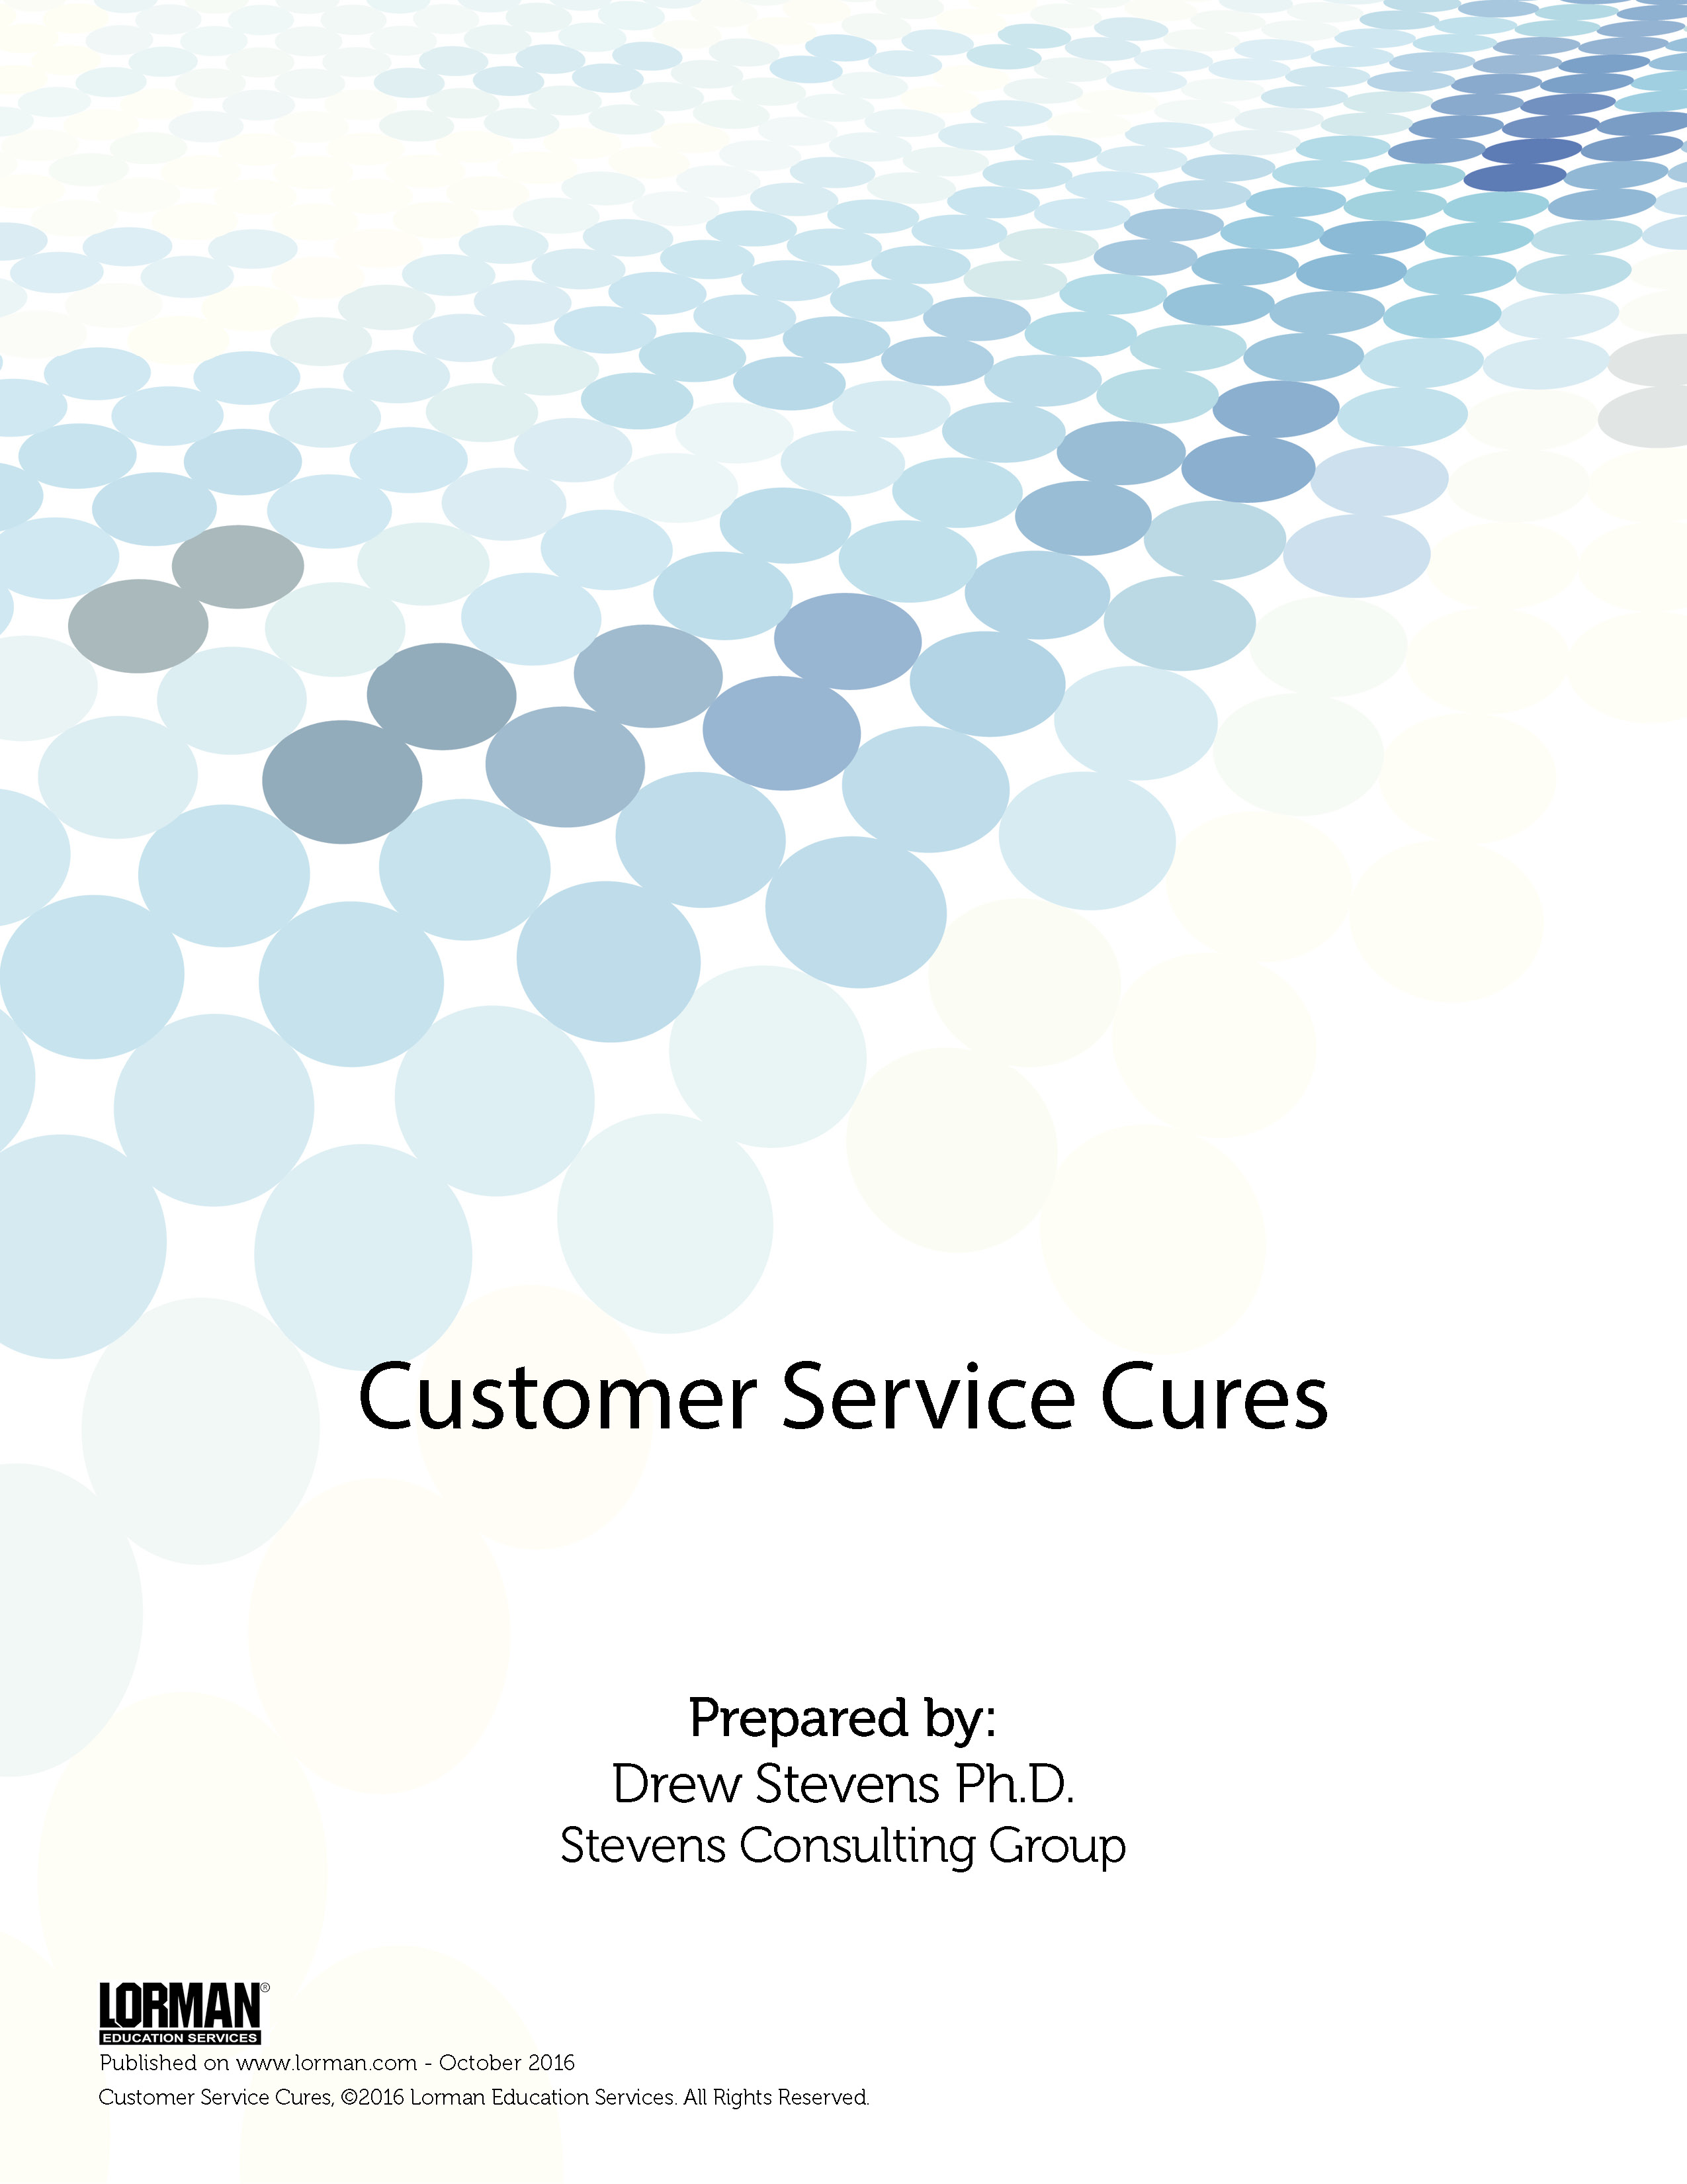 Customer Service Cures